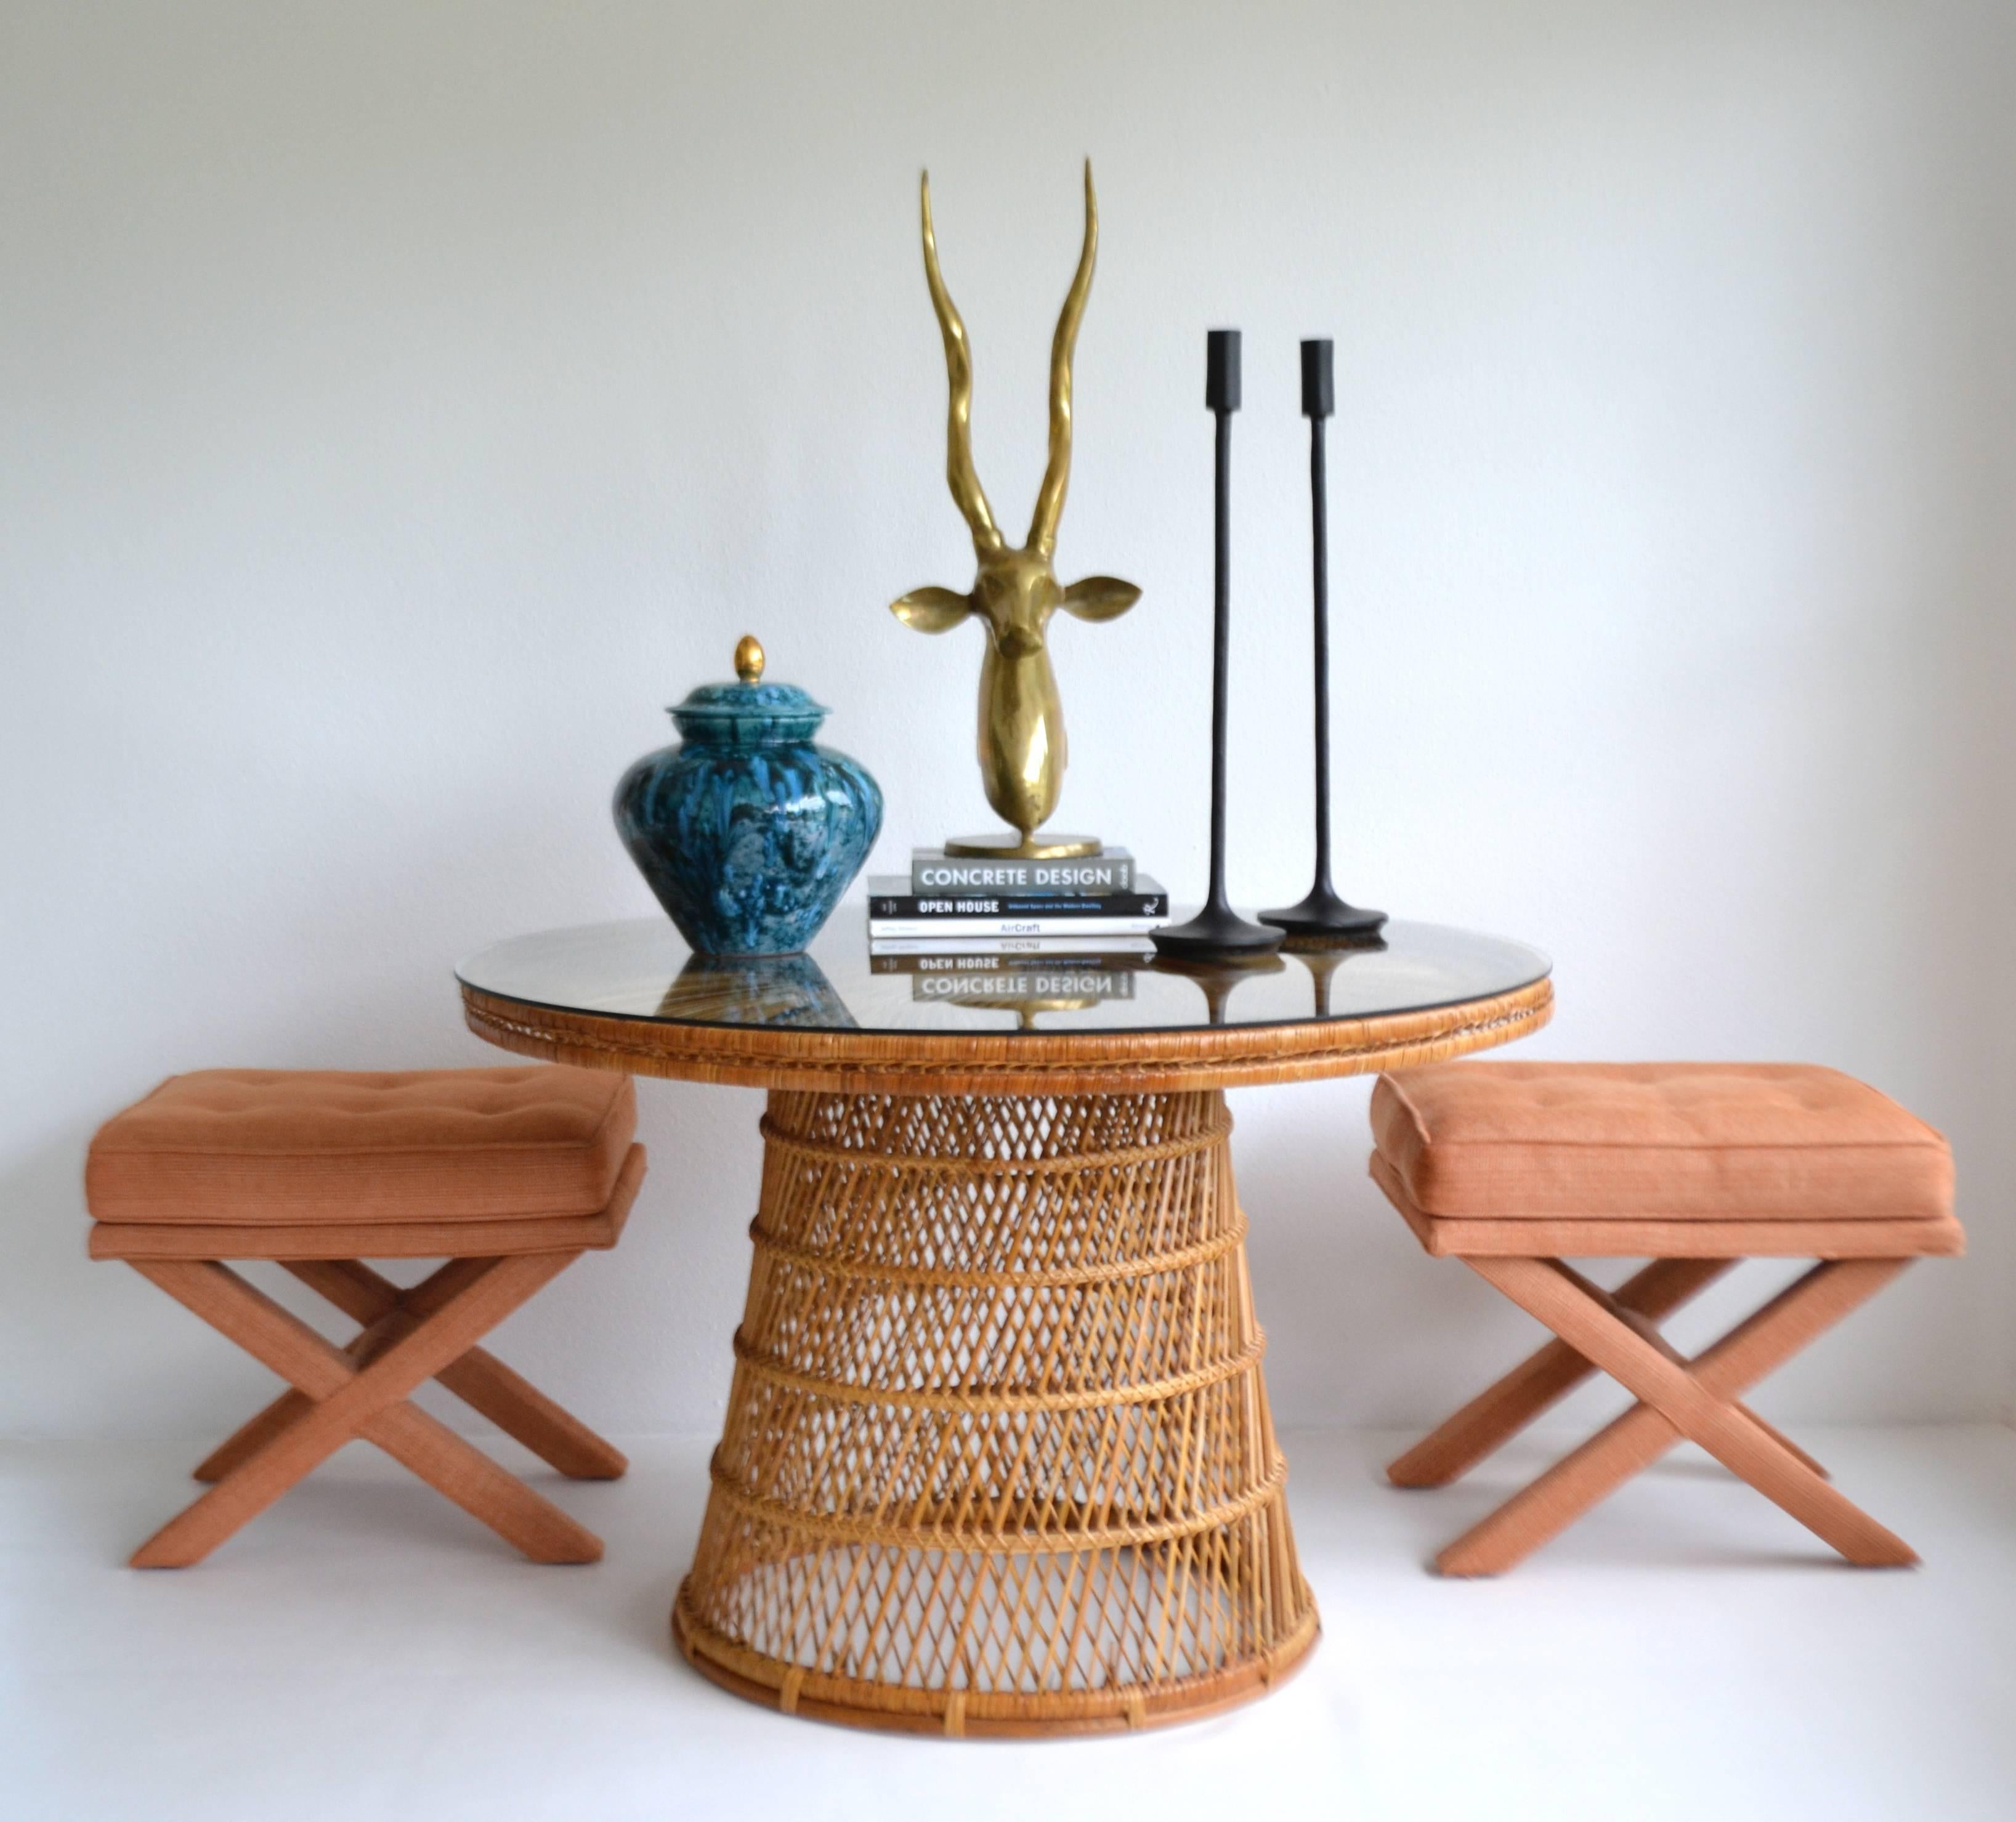 Striking Mid-Century woven rattan center hall table, circa 1960s -1970s. This striking game table is designed of an intricately webbed woven rattan pattern over a wooden frame and outfitted with a round glass top.